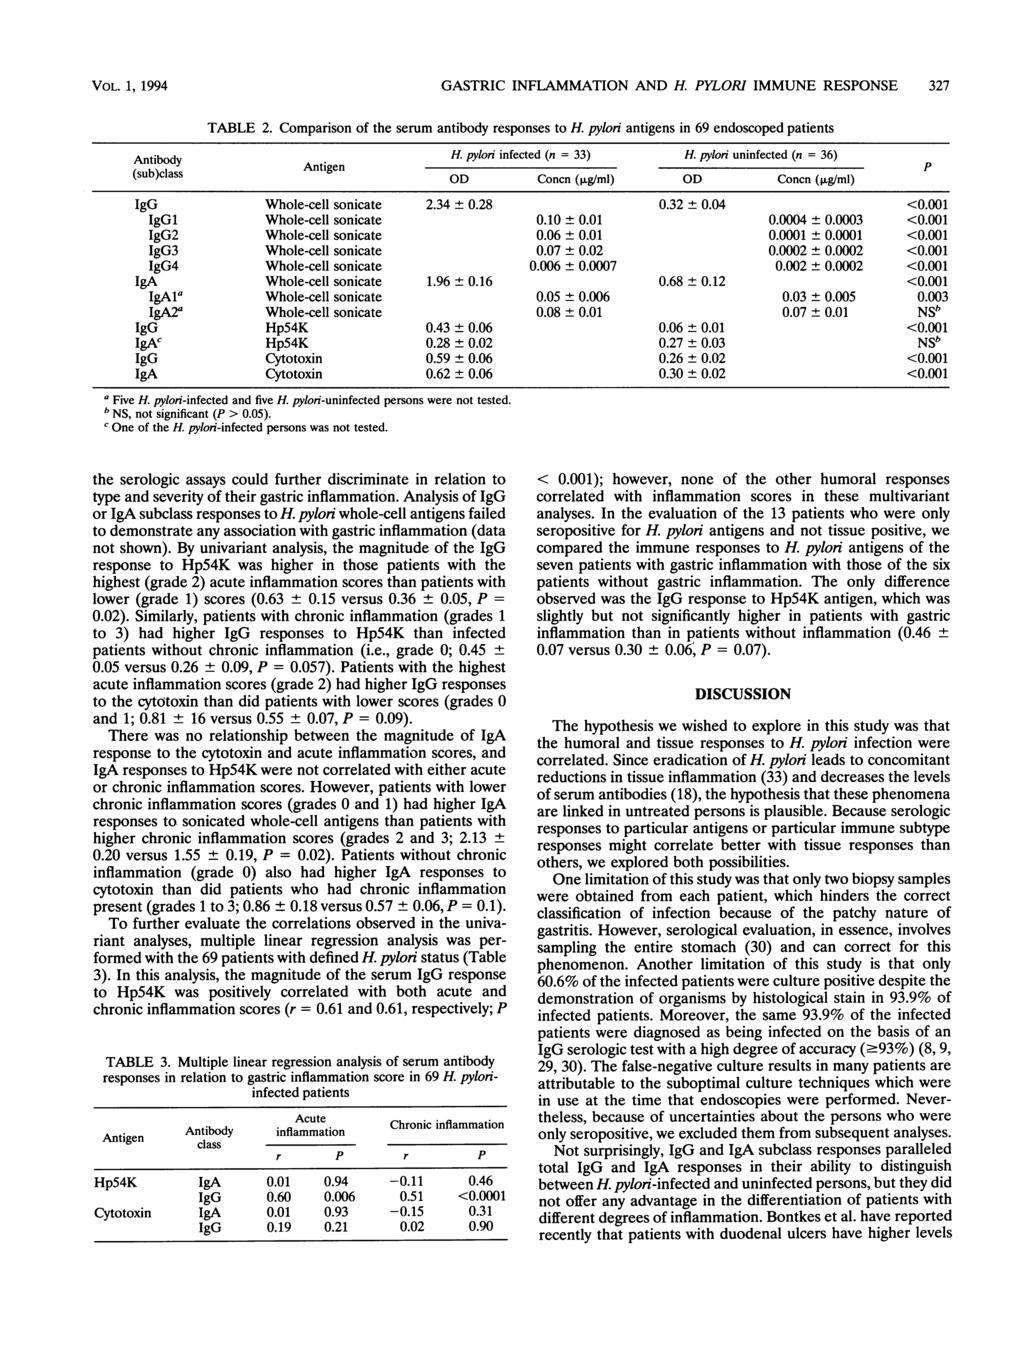 VOL. 1, 1994 GASTRIC INFLAMMATION AND H. PYLORI IMMUNE RESPONSE 327 TABLE 2. Comparison of the serum antibody responses to H. pylon antigens in 69 endoscoped patients Antibody Antigen H.